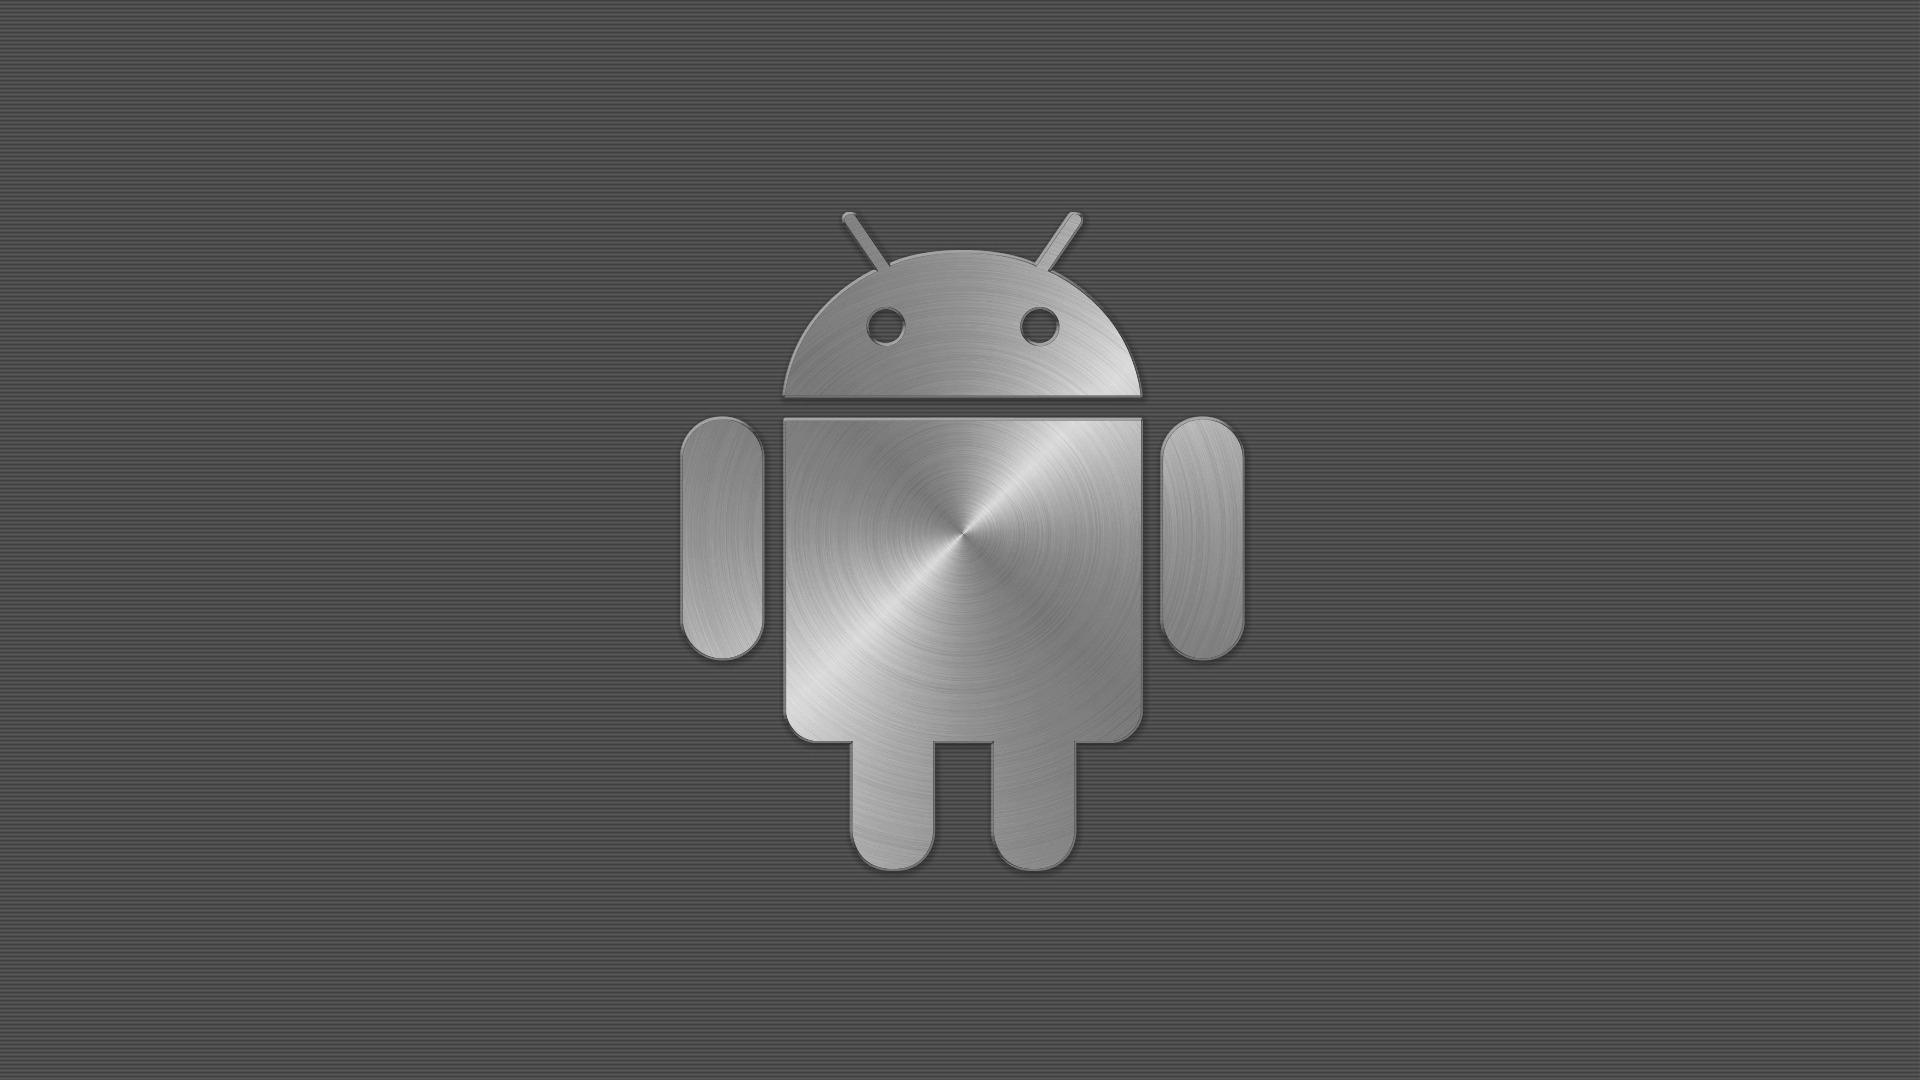 Geek insider, geekinsider, geekinsider. Com,, android silver was a great dream – but perhaps is no more, android